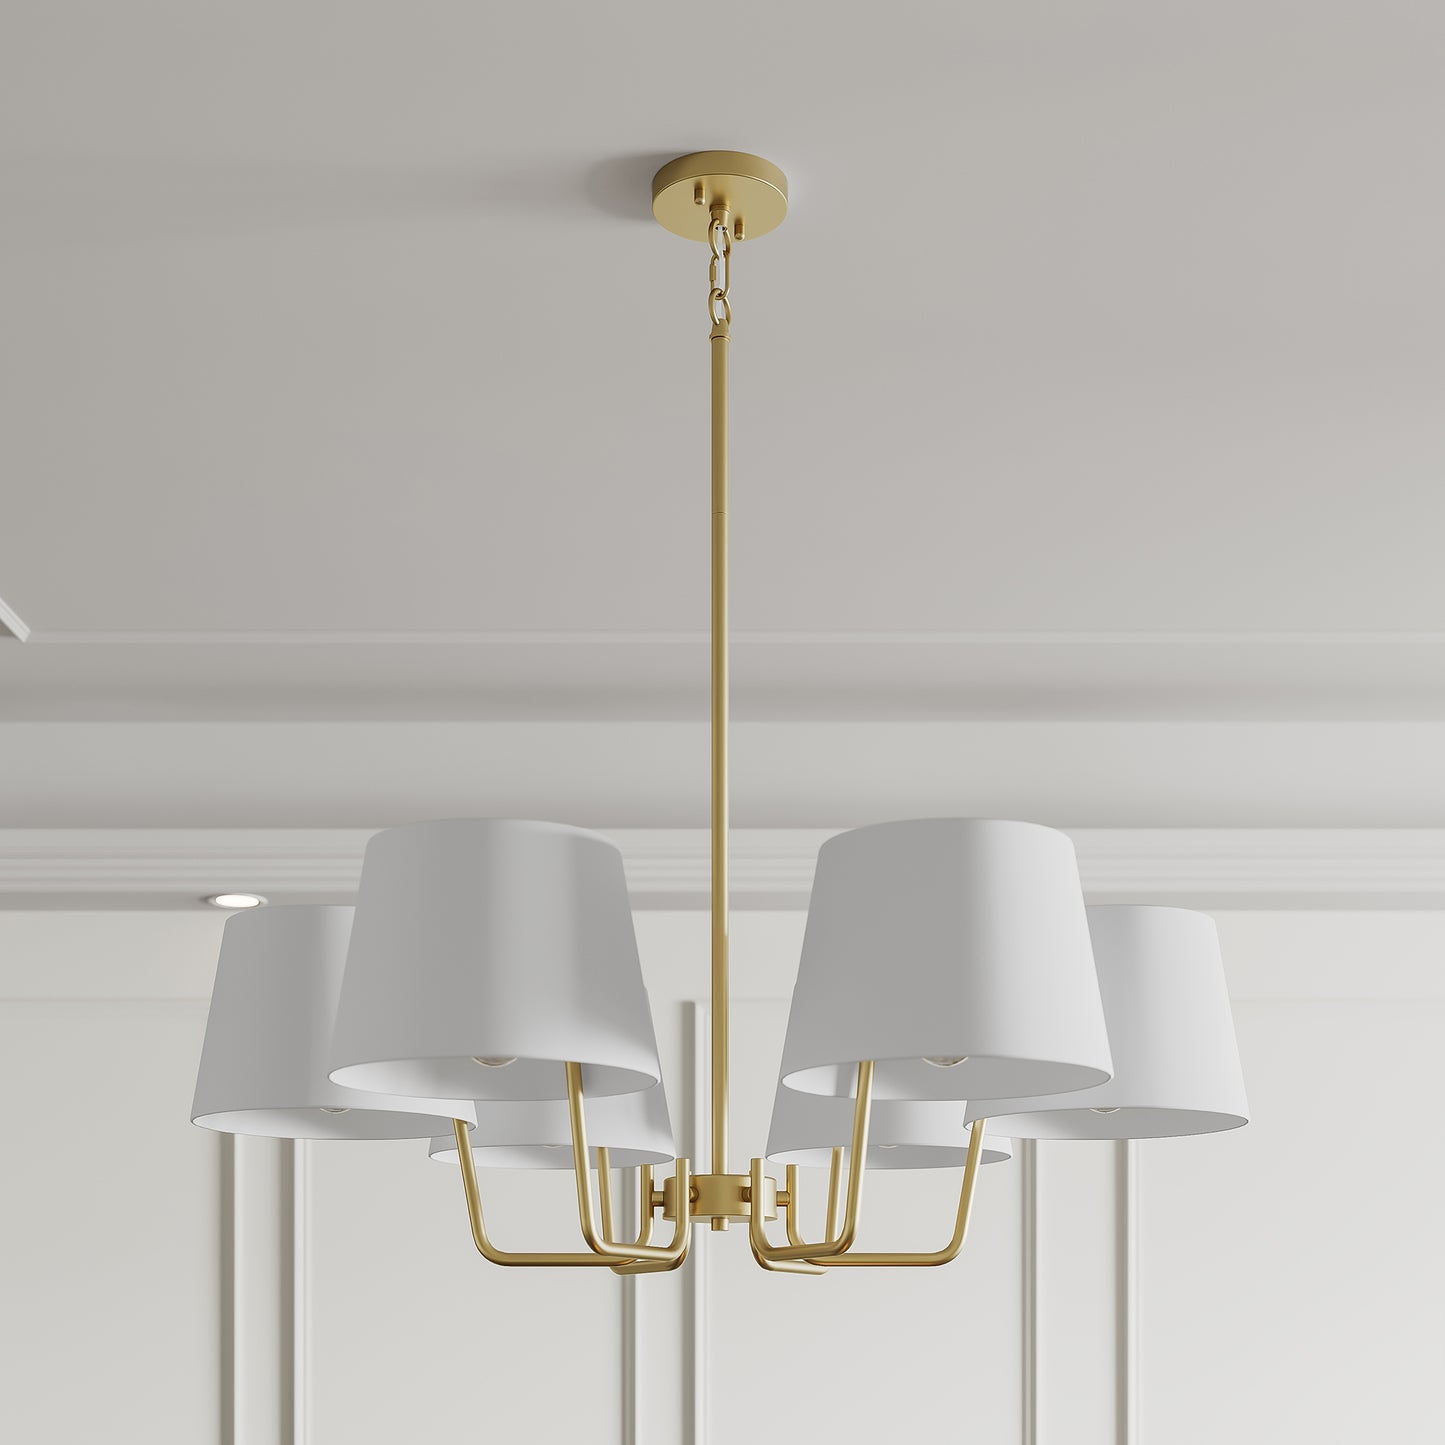 6 light classic traditional chandelier (4) by ACROMA